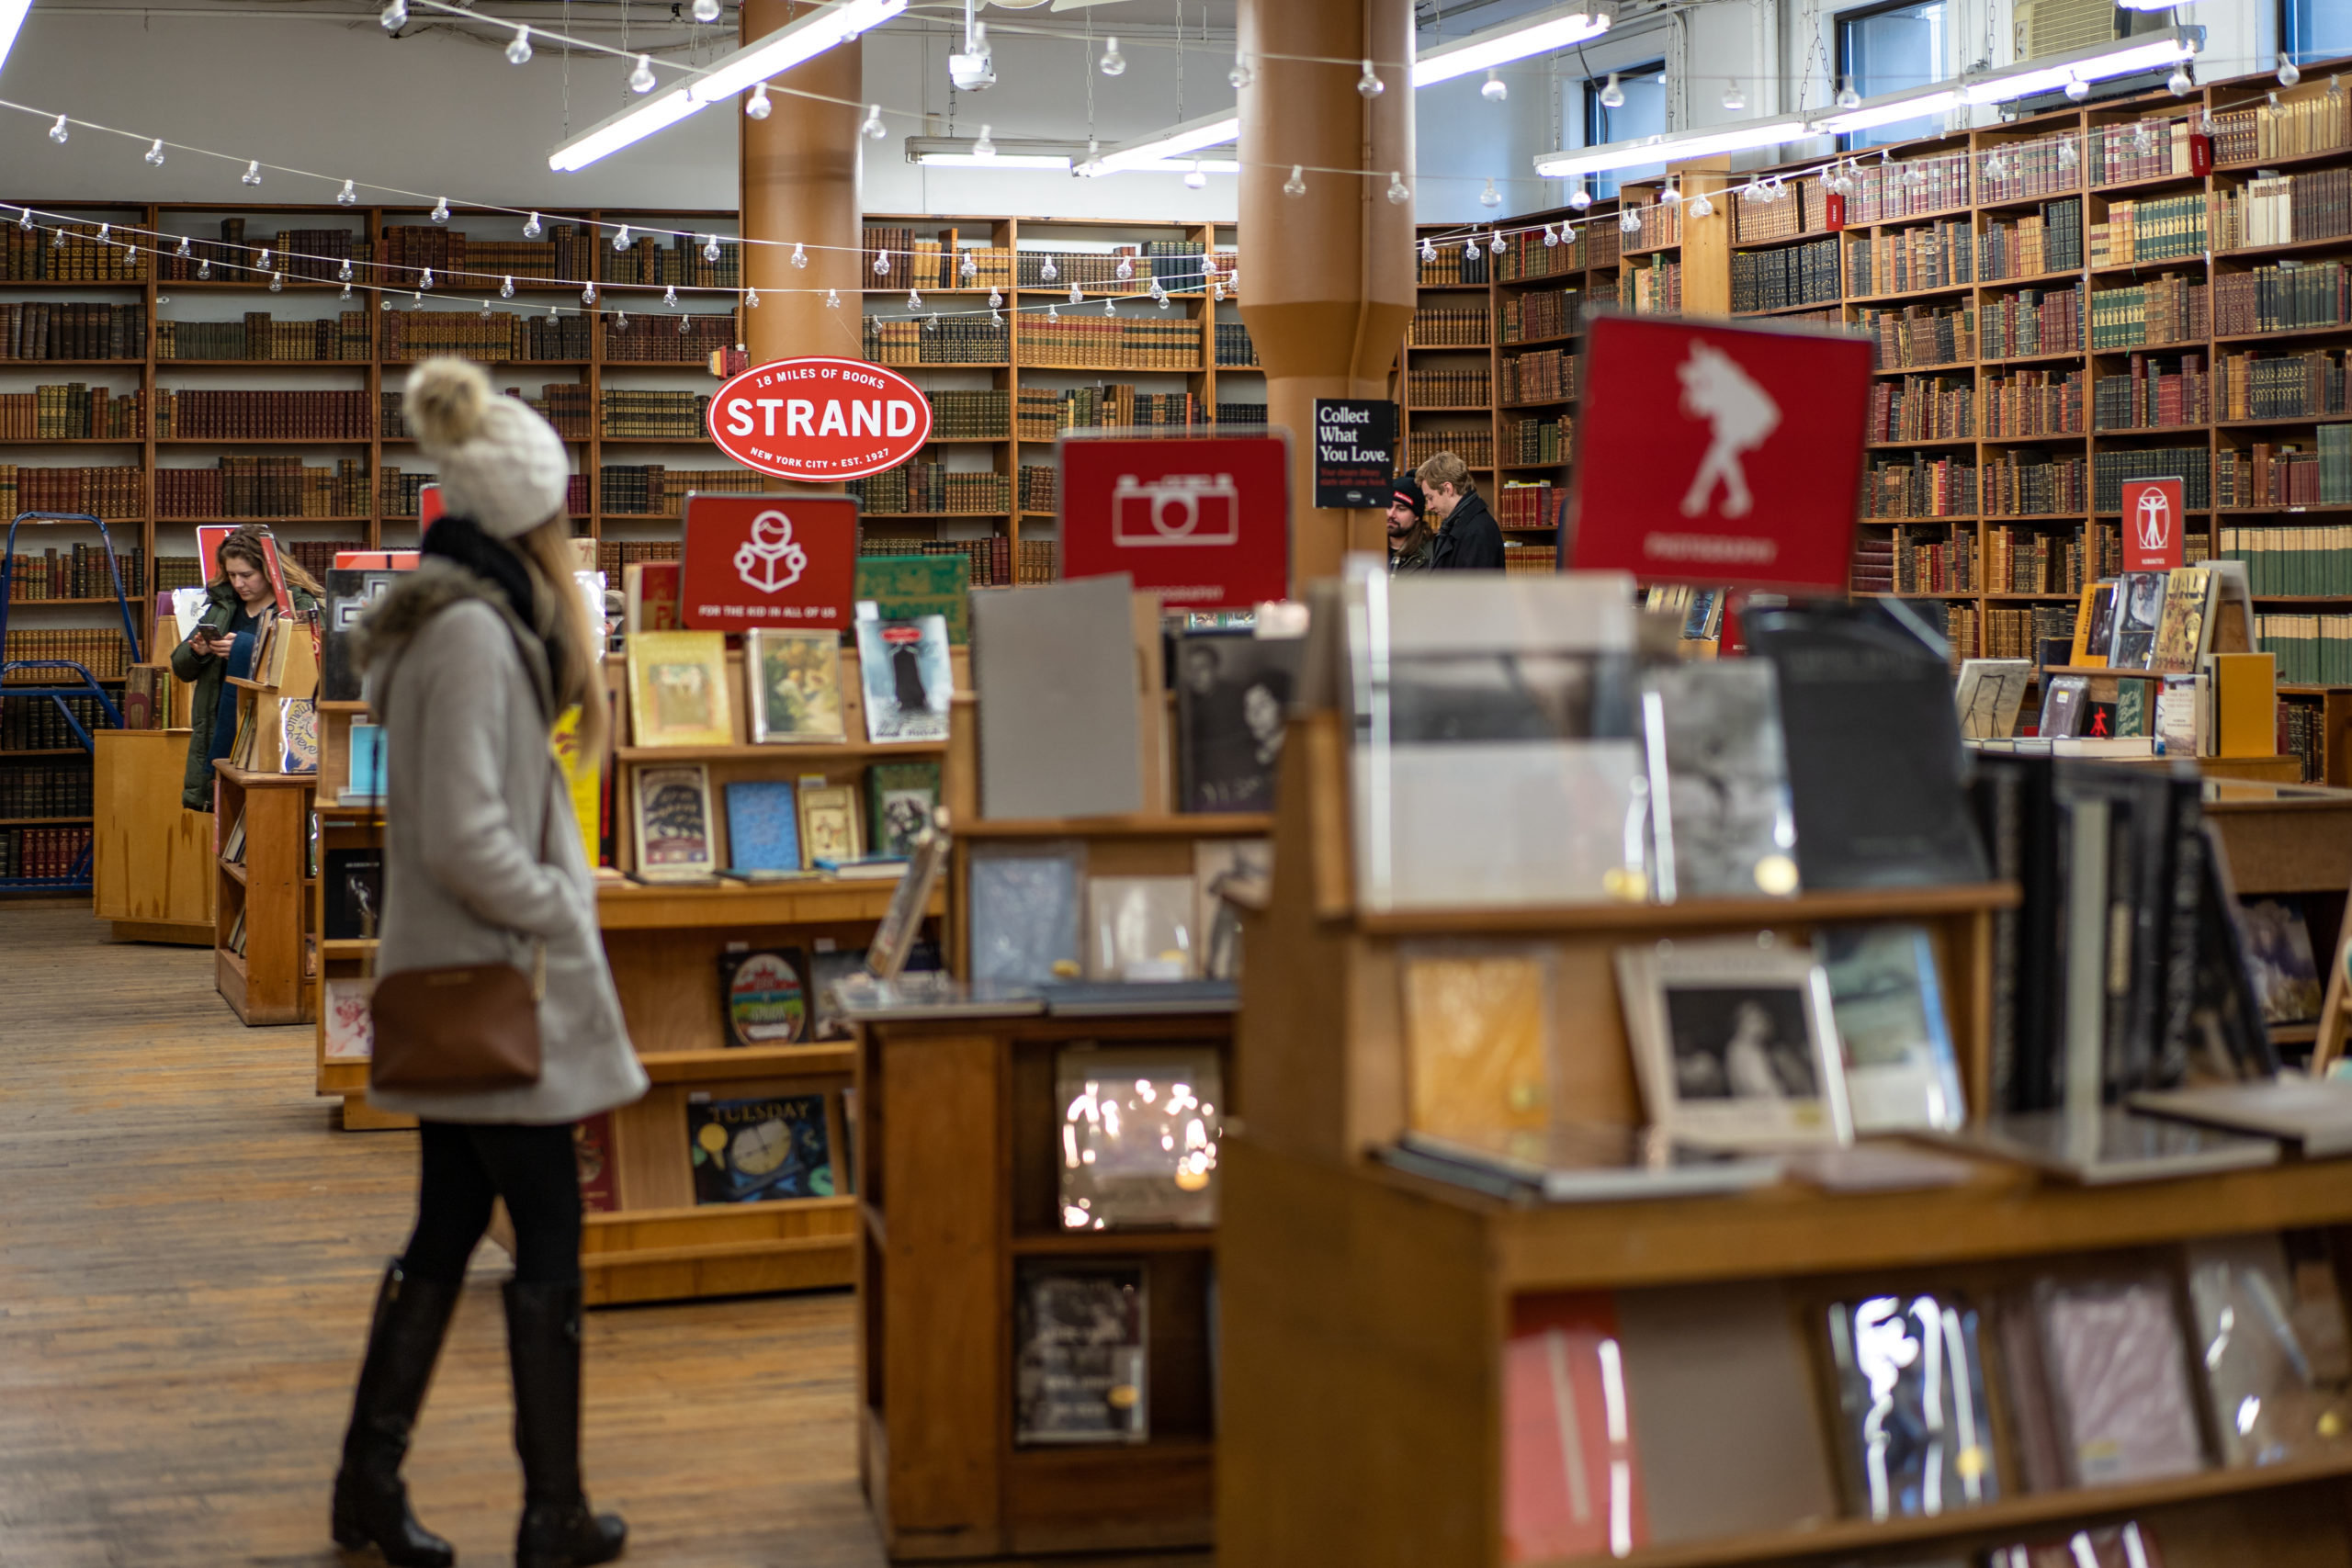 Top Two Boroughs for Bookworms: Independent Bookshop, The Strand, wooden bookshelves, and a woman in a hat and coat walking through